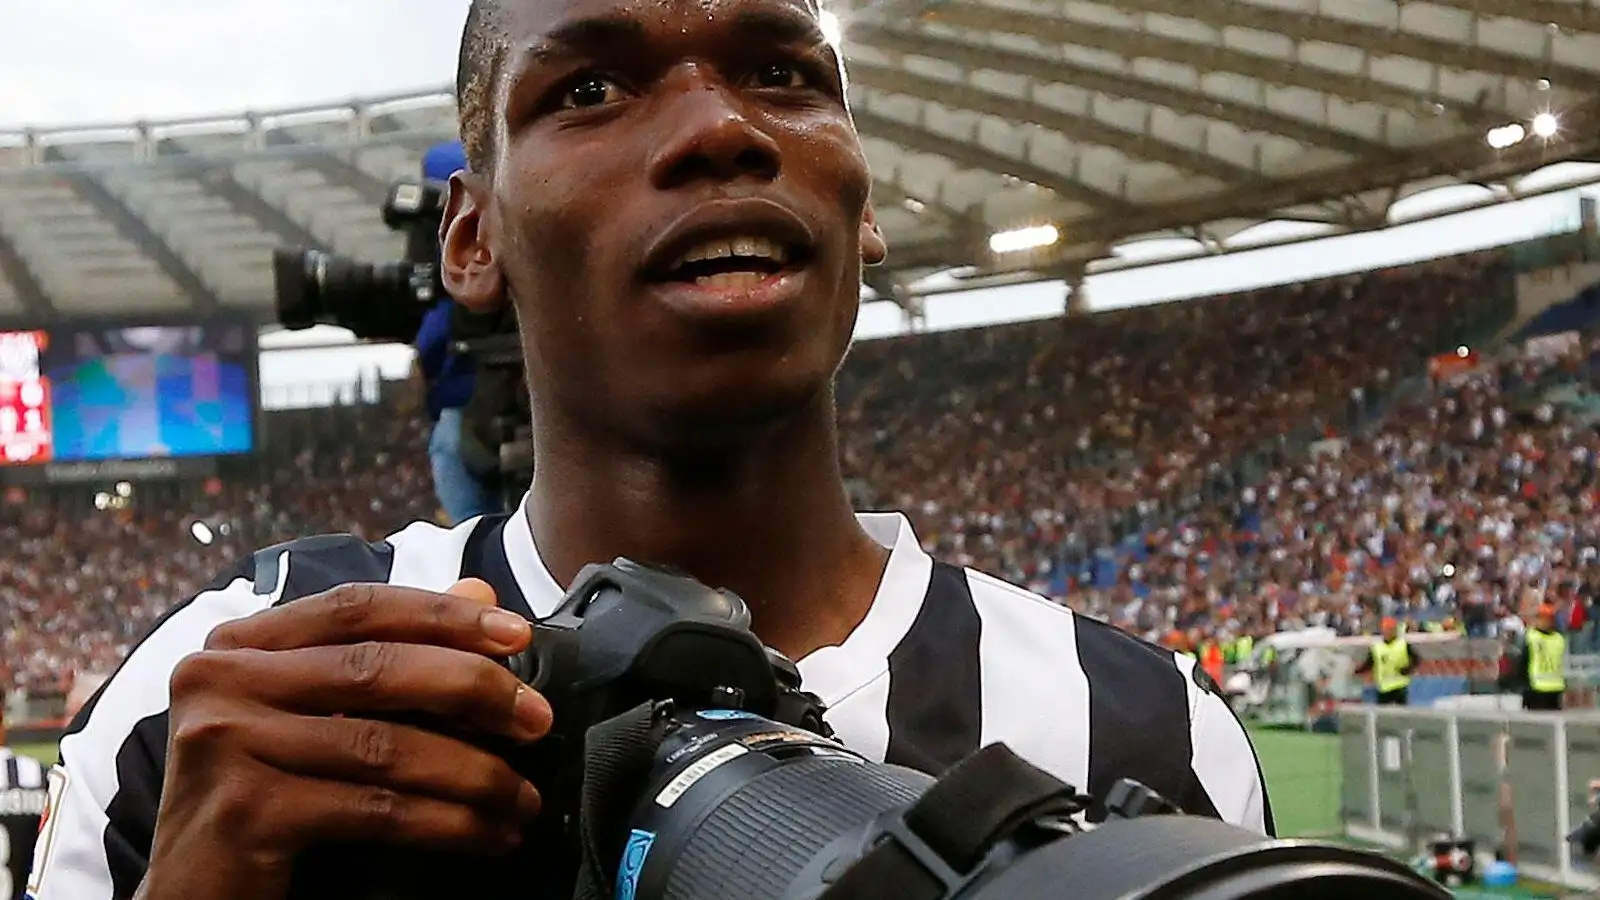 Paul Pogba: The anatomy of Manchester United's prospective new star